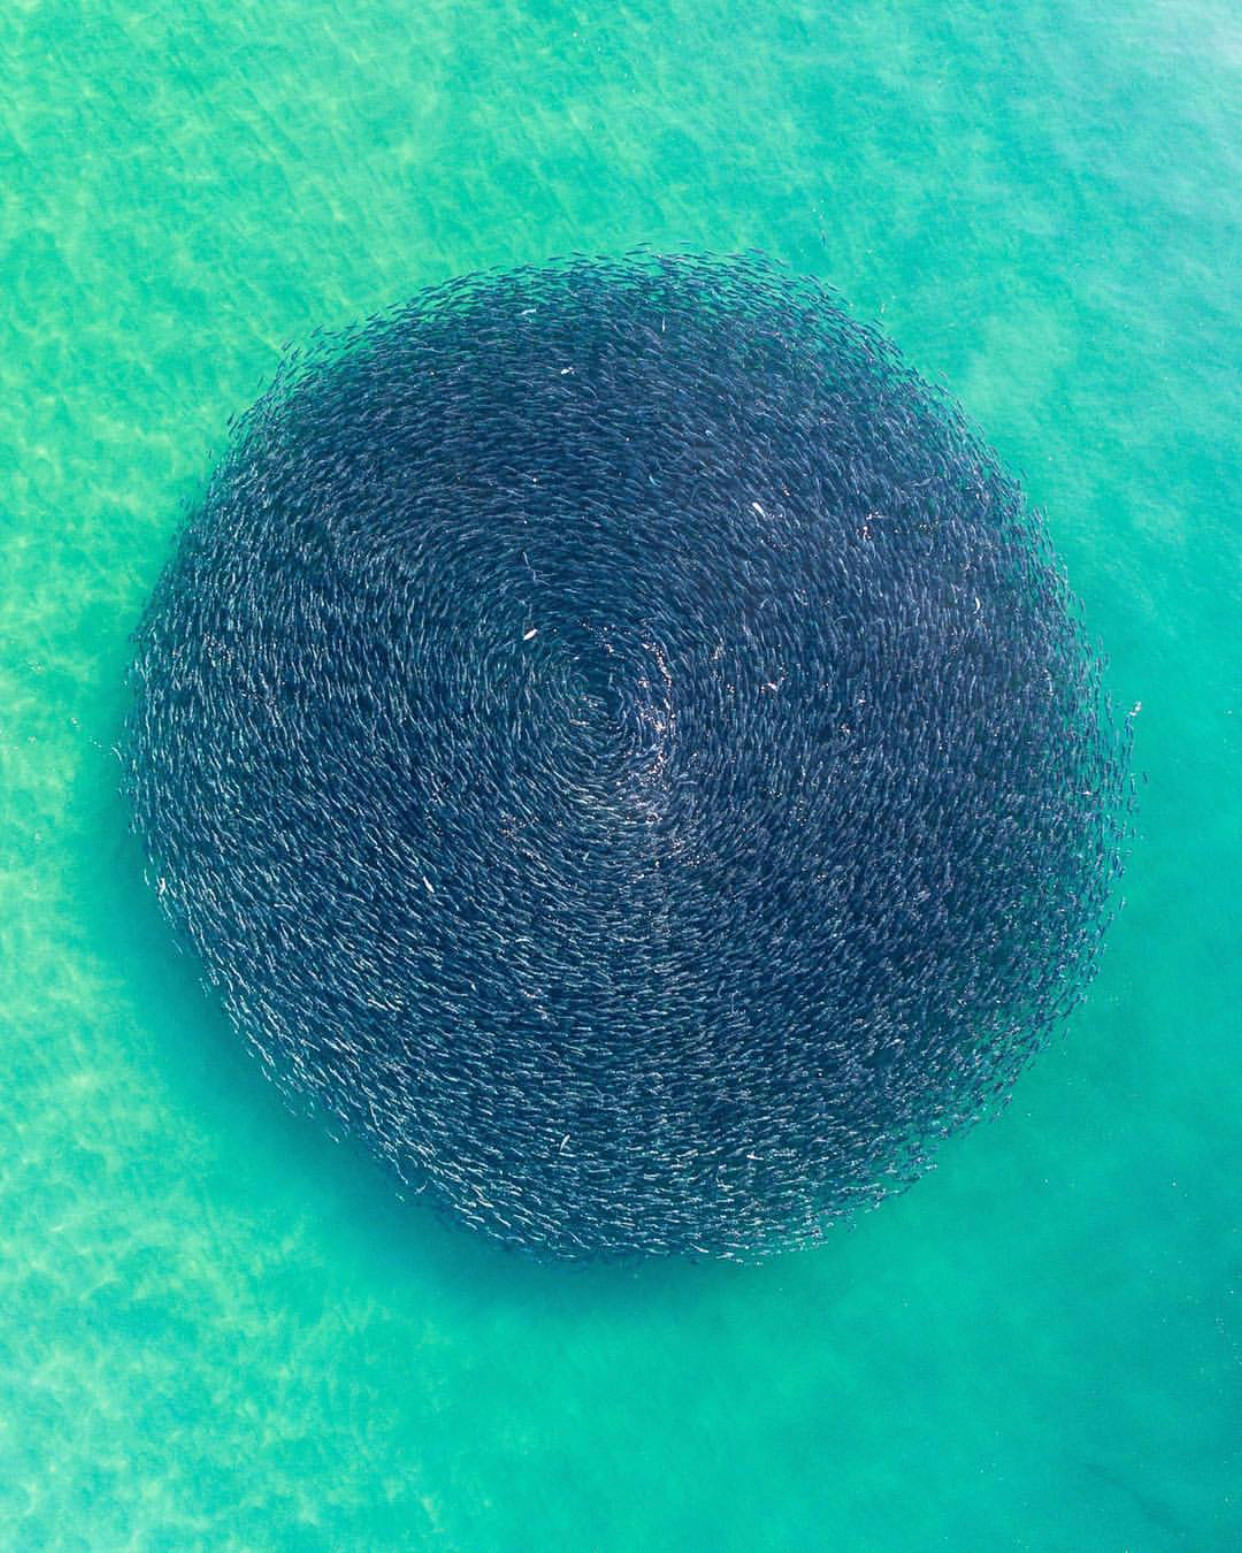 This photo, which shows a circular gathering of salmon on Wembral Beach in New South Wales, was taken at once and has not been manipulated. The photographer is Reed Plummer.